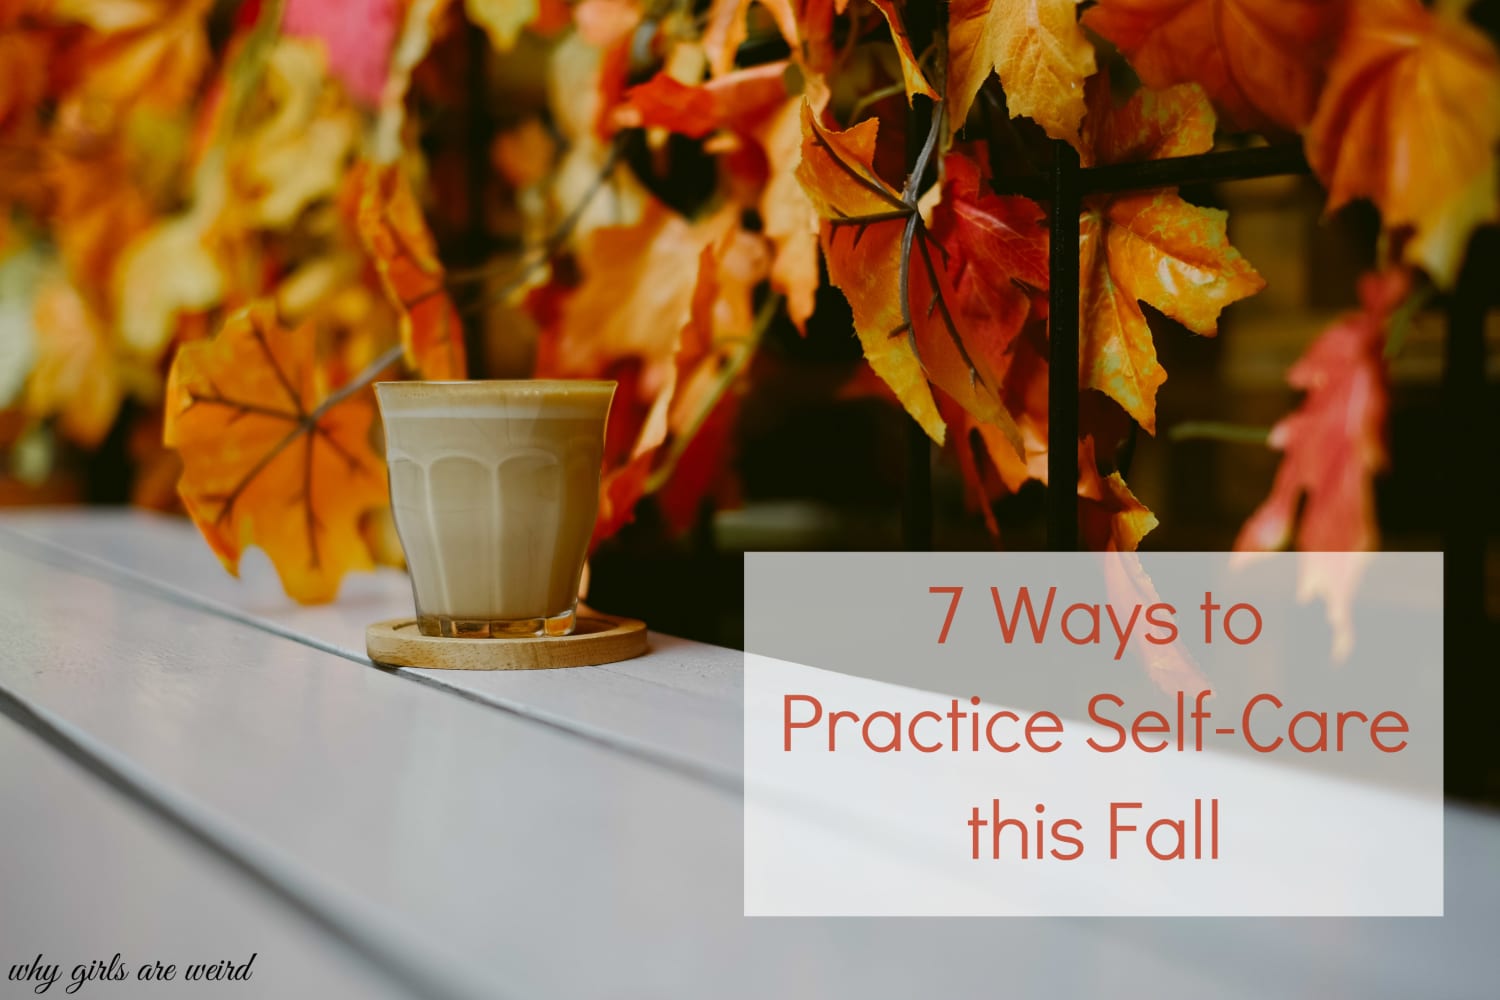 7 Ways to Practice Self-Care this Fall